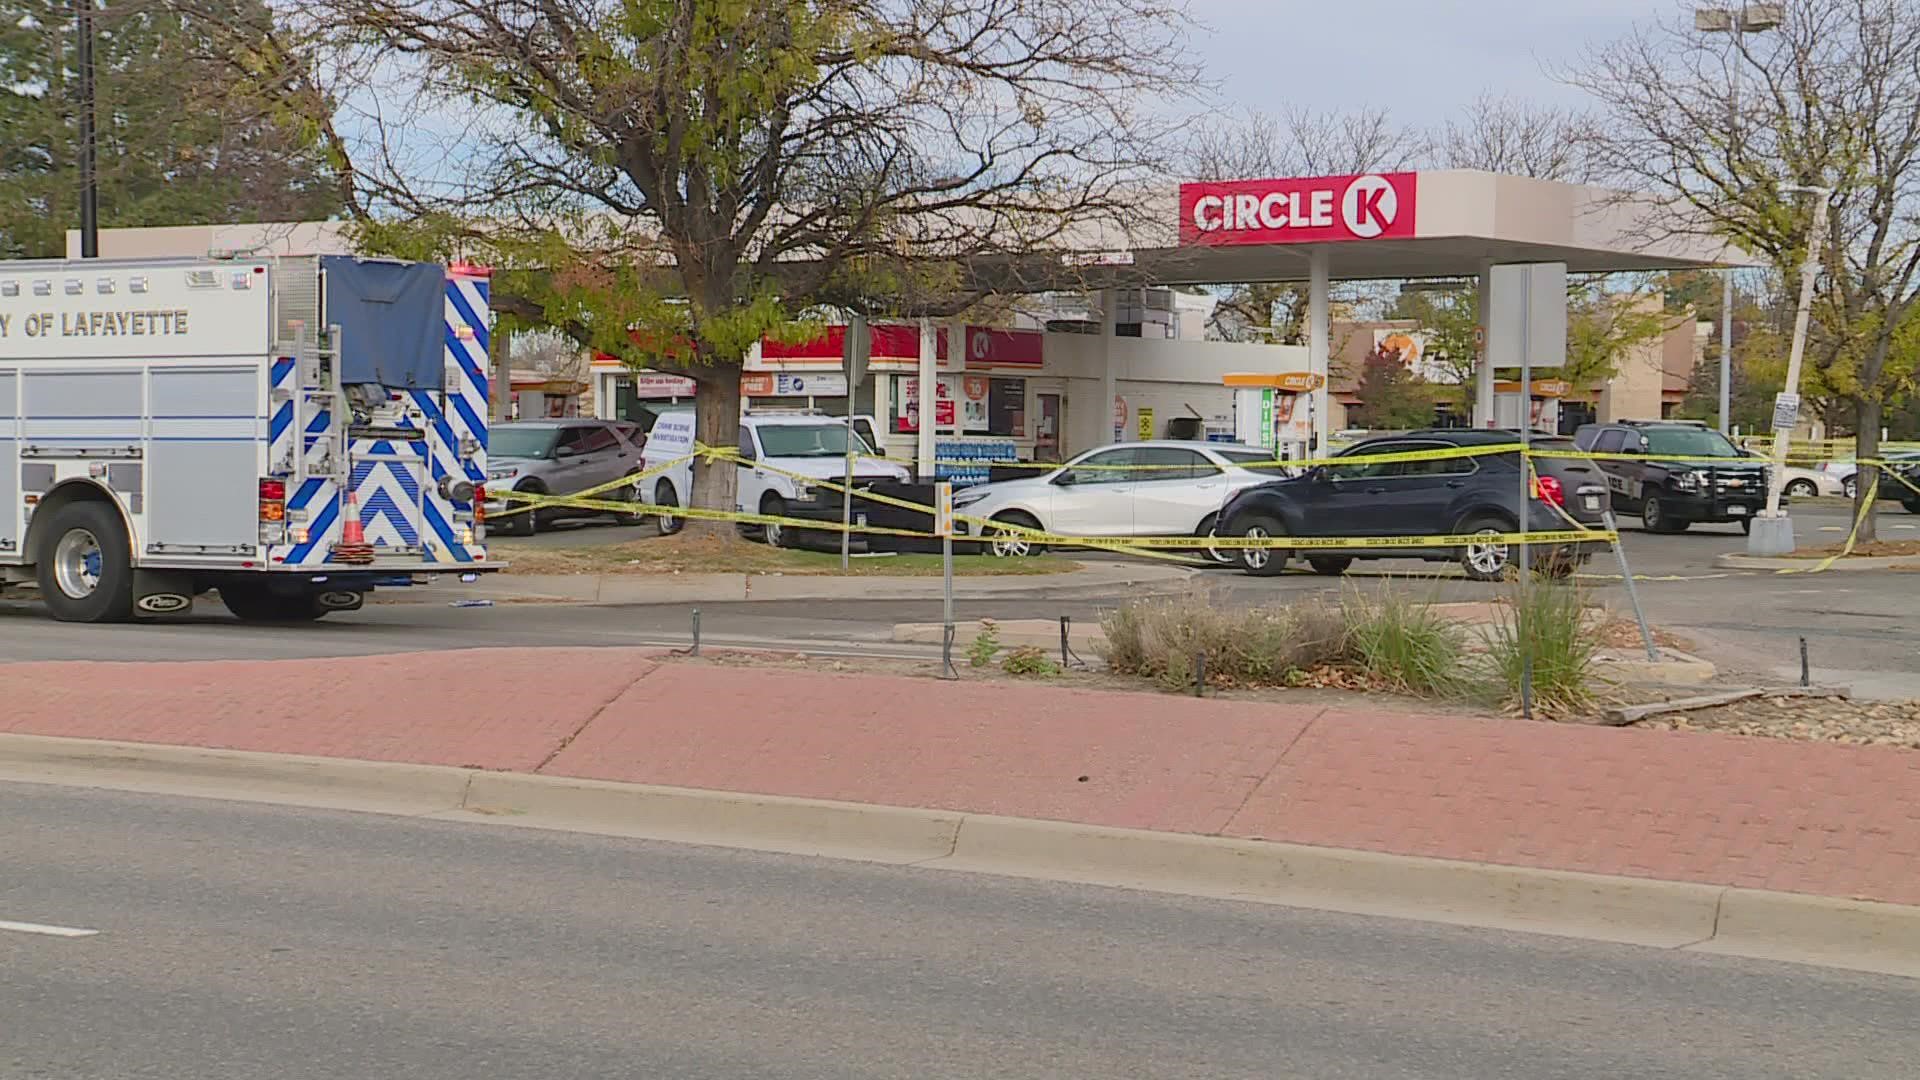 A suspect was fatally shot in an exchange of gunfire at a gas station early Tuesday morning.